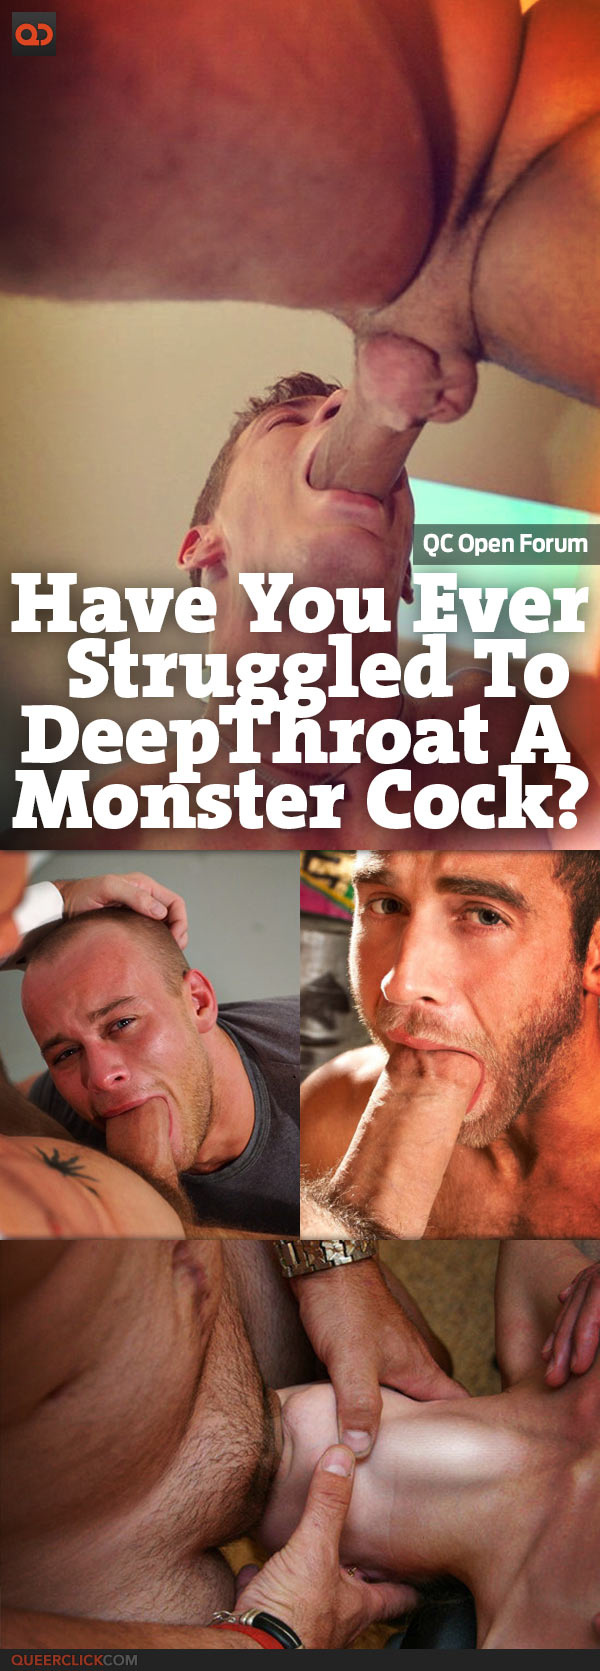 QC Open Forum: Have You Ever Struggled To Deepthroat A Monster Cock?